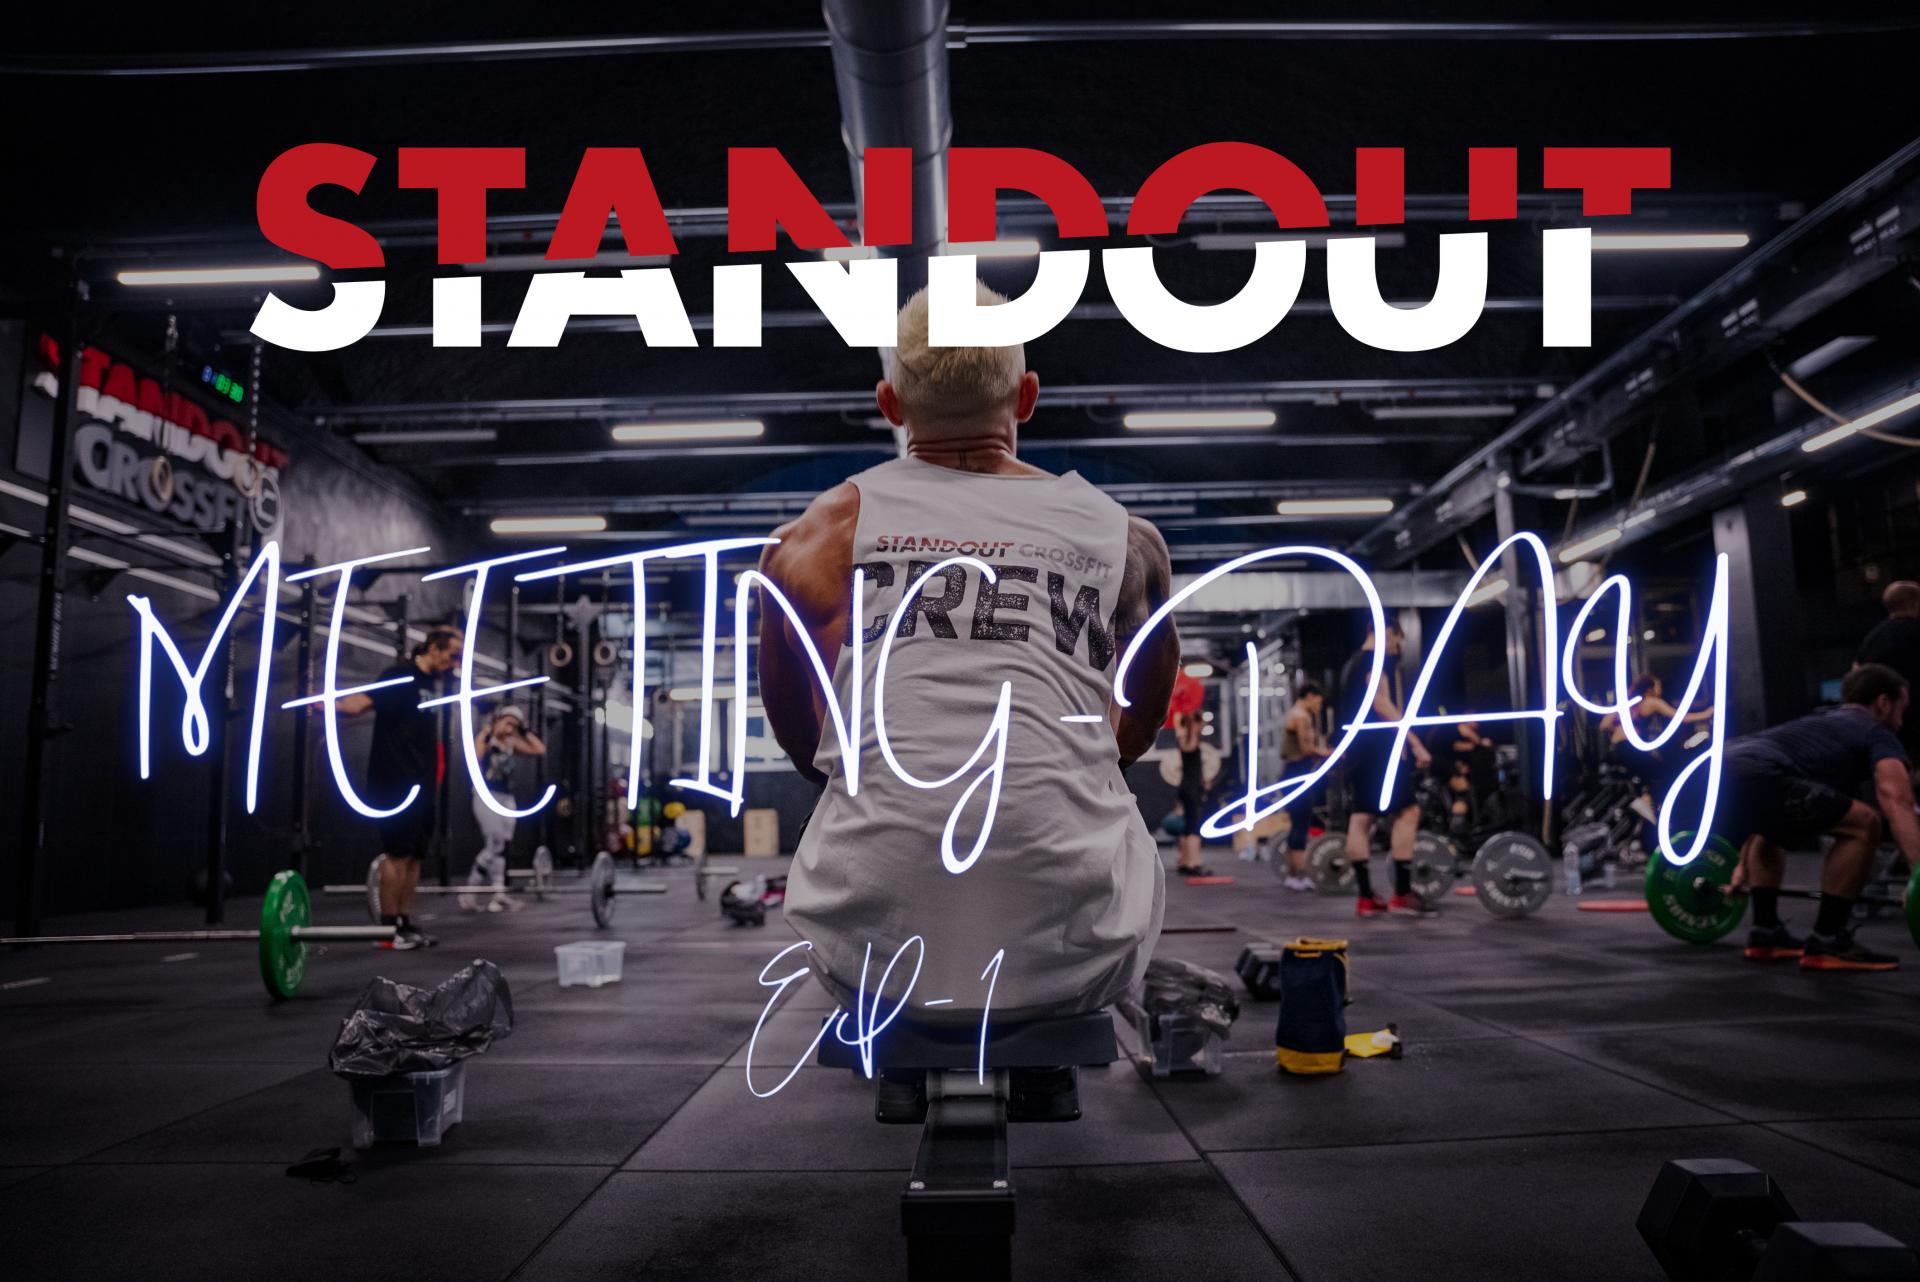 THE STANDOUT COMMUNITY MEETING DAY EP. 1